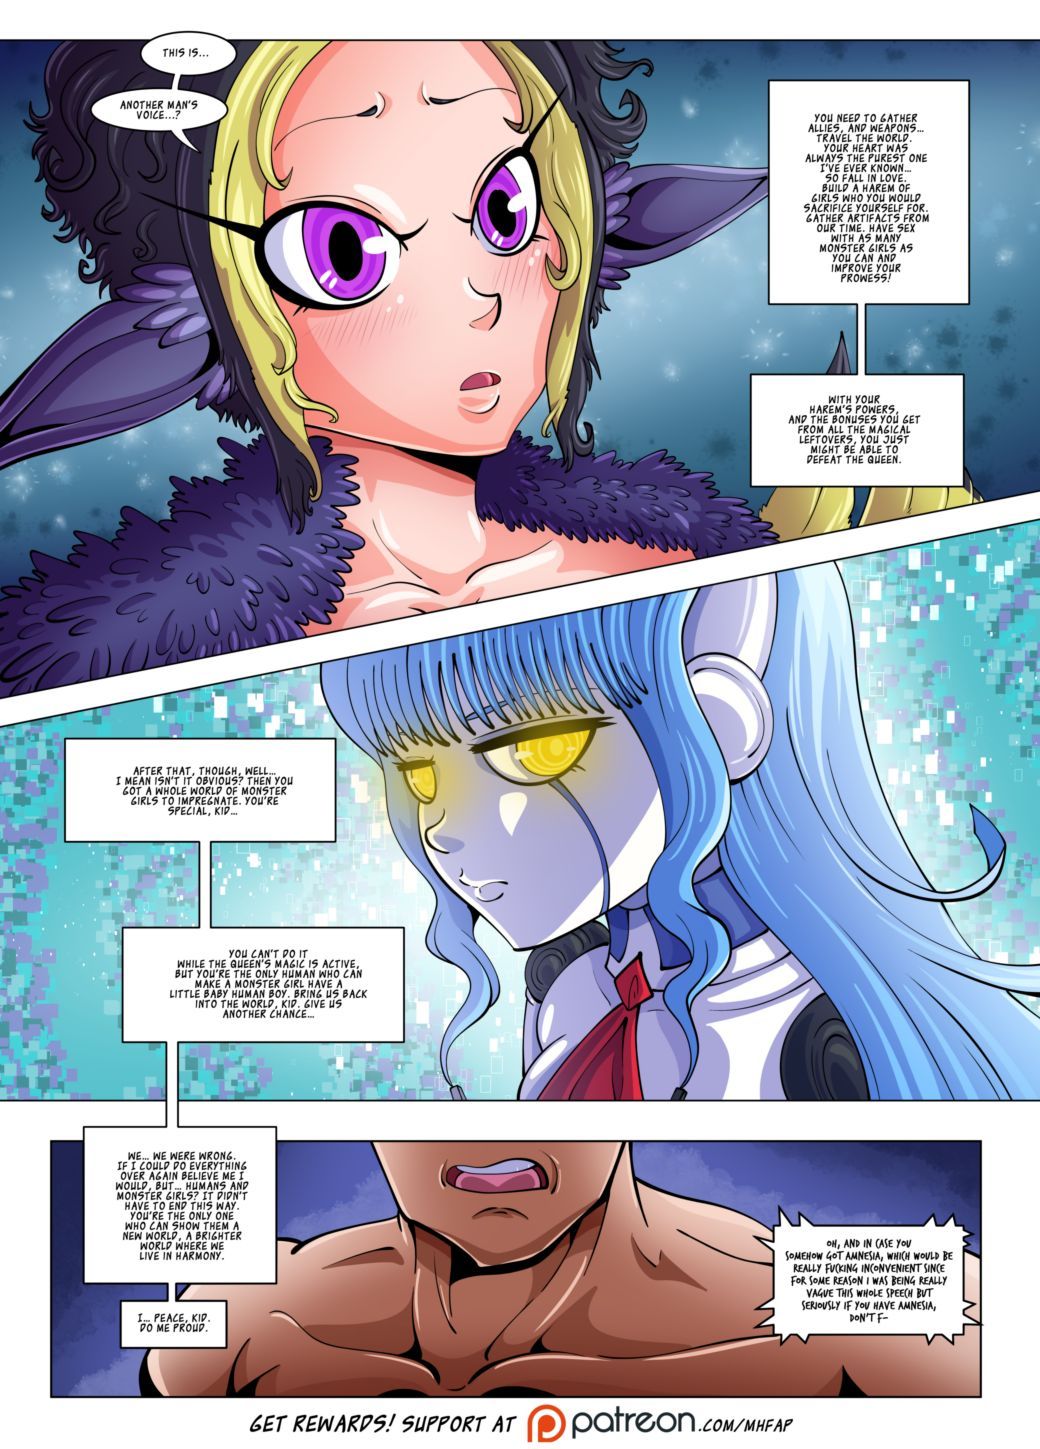 [PunishedKom] Monster Harem Feverish Absolute Passion! Ch. 1-2.1 [Ongoing] 58